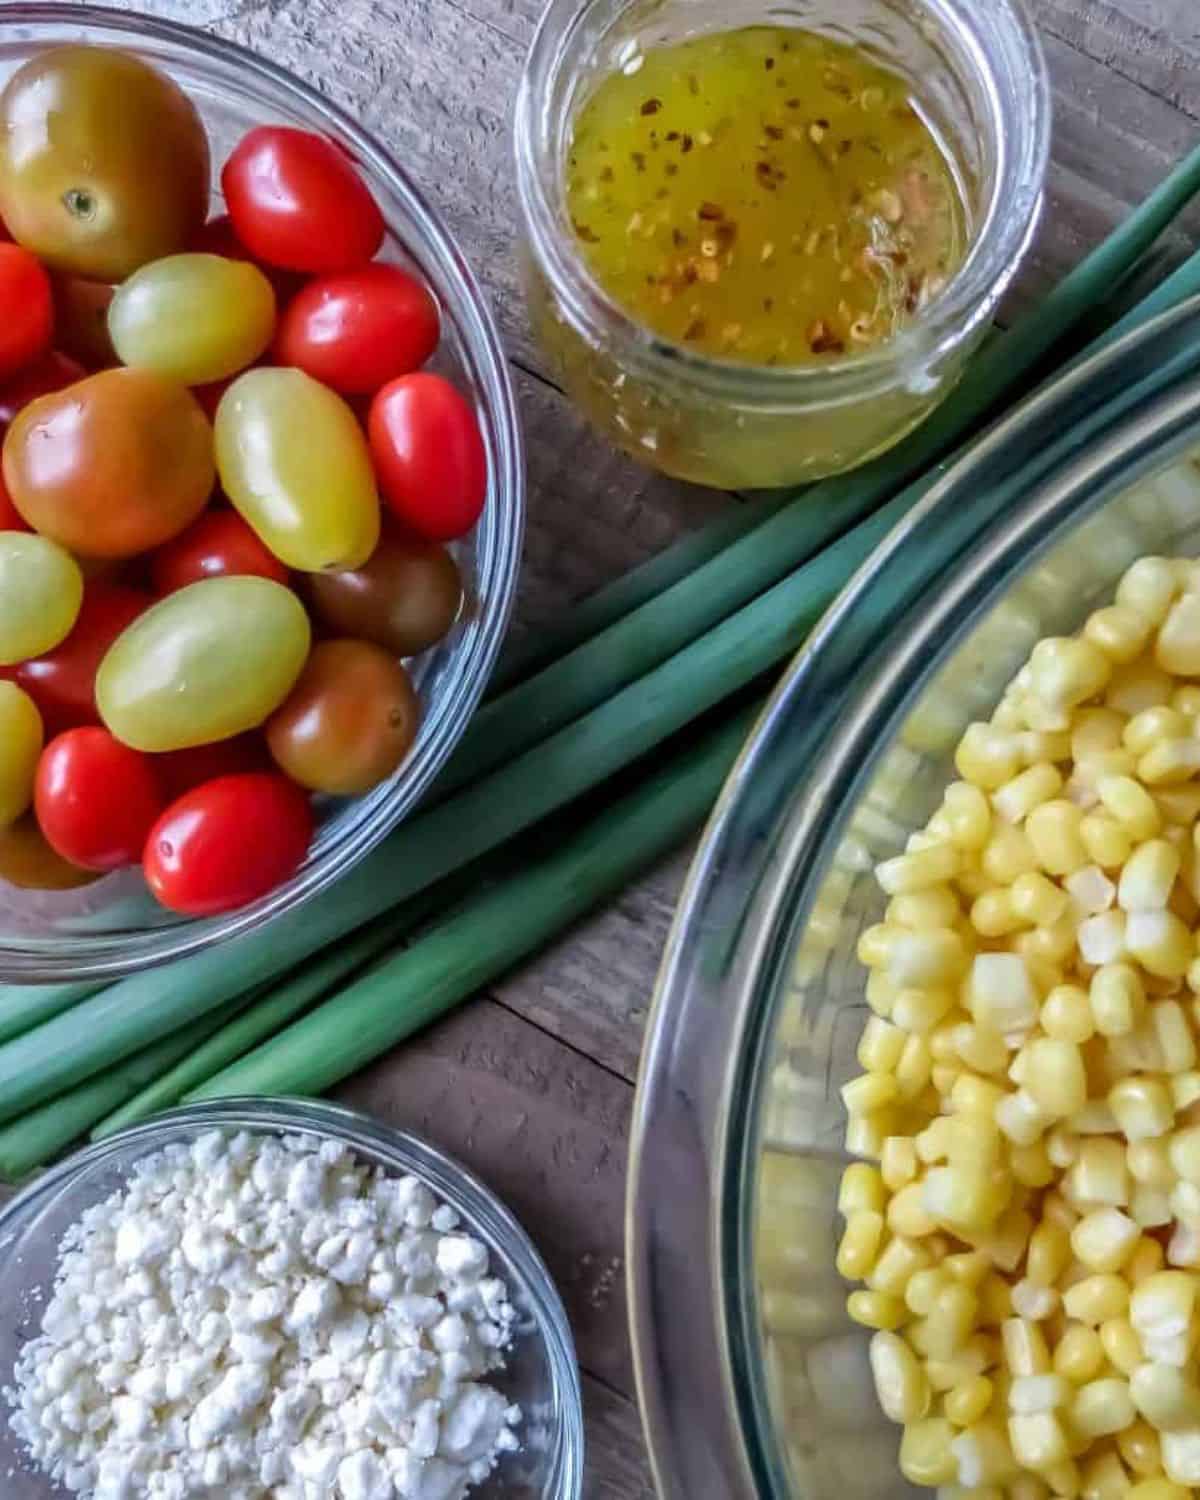 Individual bowls of corn, grape tomatoes, feta cheese, a jar of vinaigrette and some green onions on a wooden board for Corn Salad With Tomatoes.